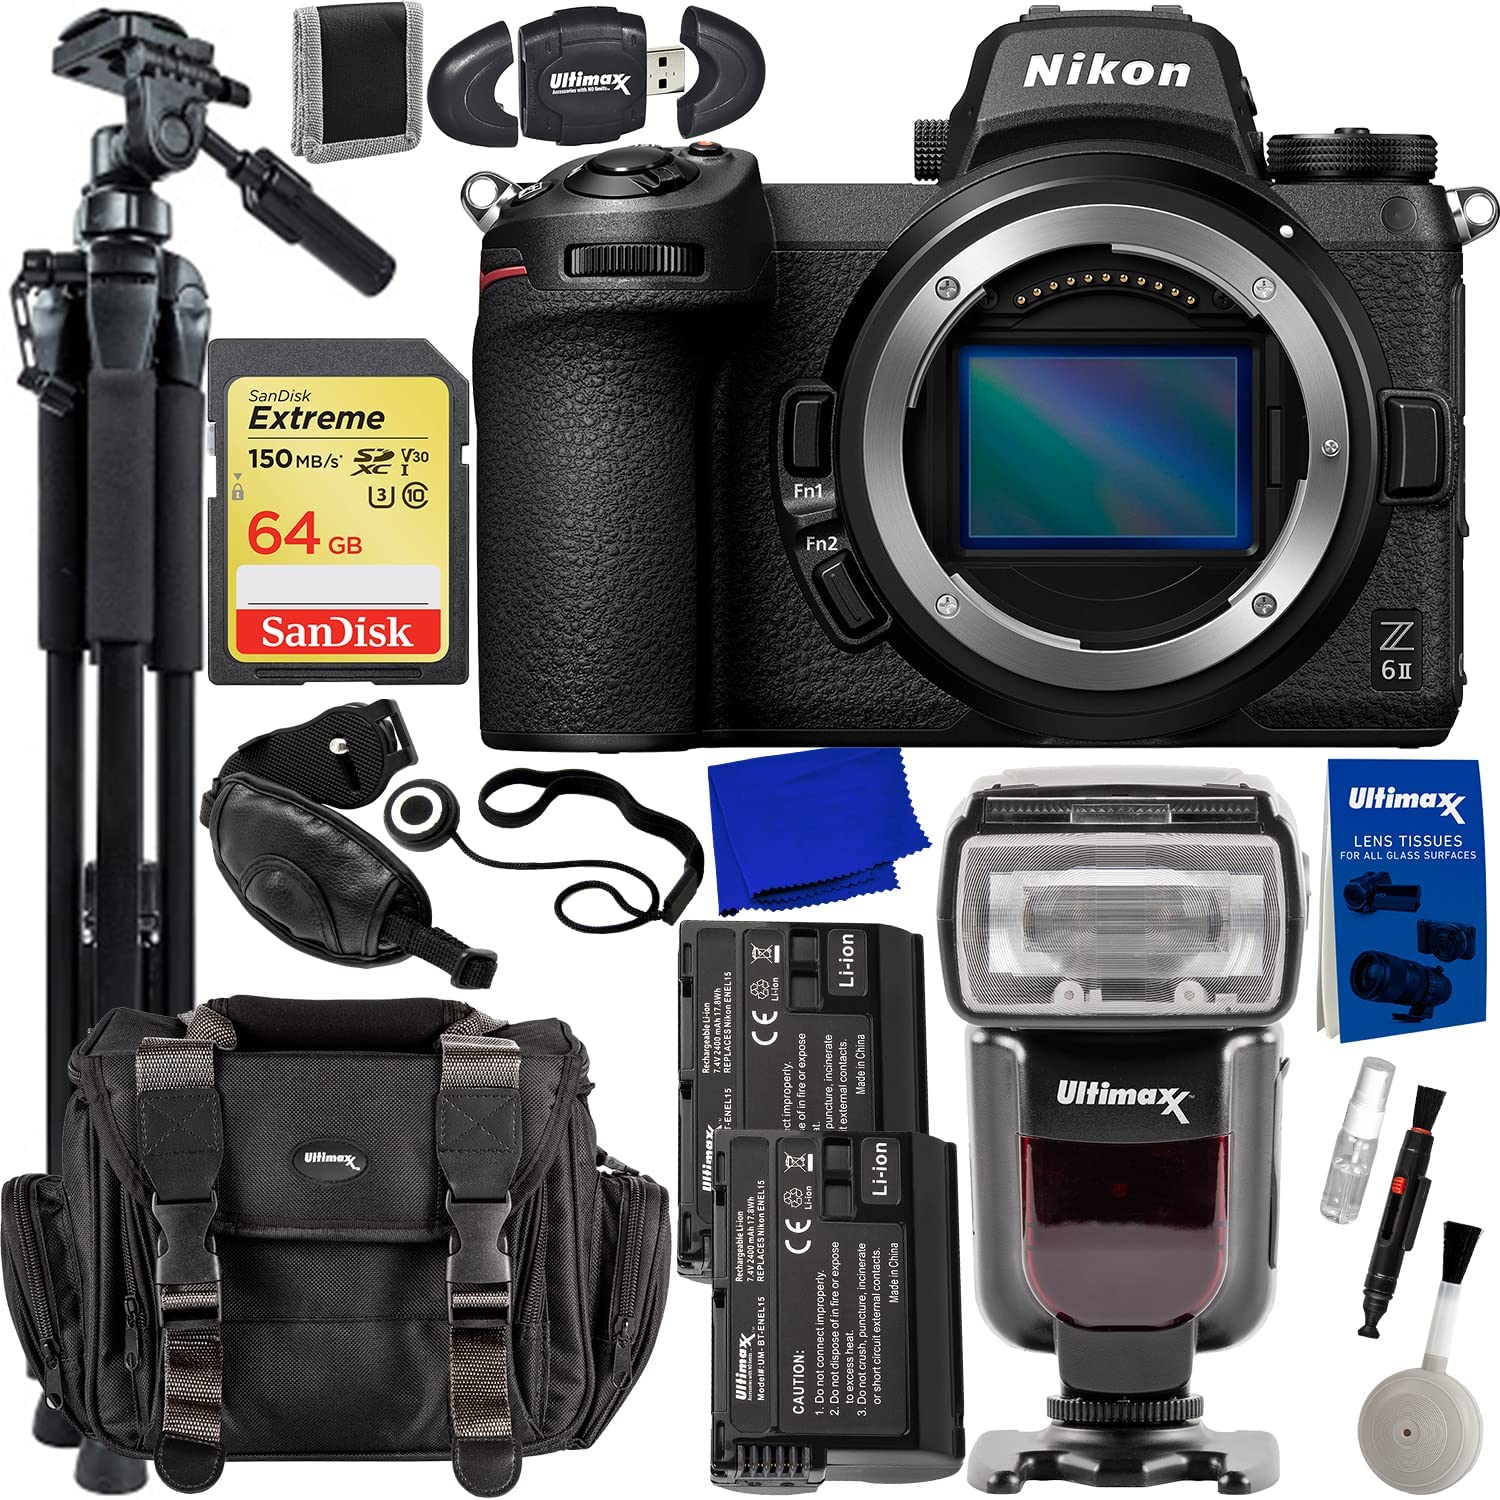 Nikon Z6 II Mirrorless Camera (Body Only) + Advanced Accessory Bundle: SanDisk 64GB Extreme SDXC Memory Card, 2x Spare Batteries, Universal Speedlite & Much More (24pc Bundle)